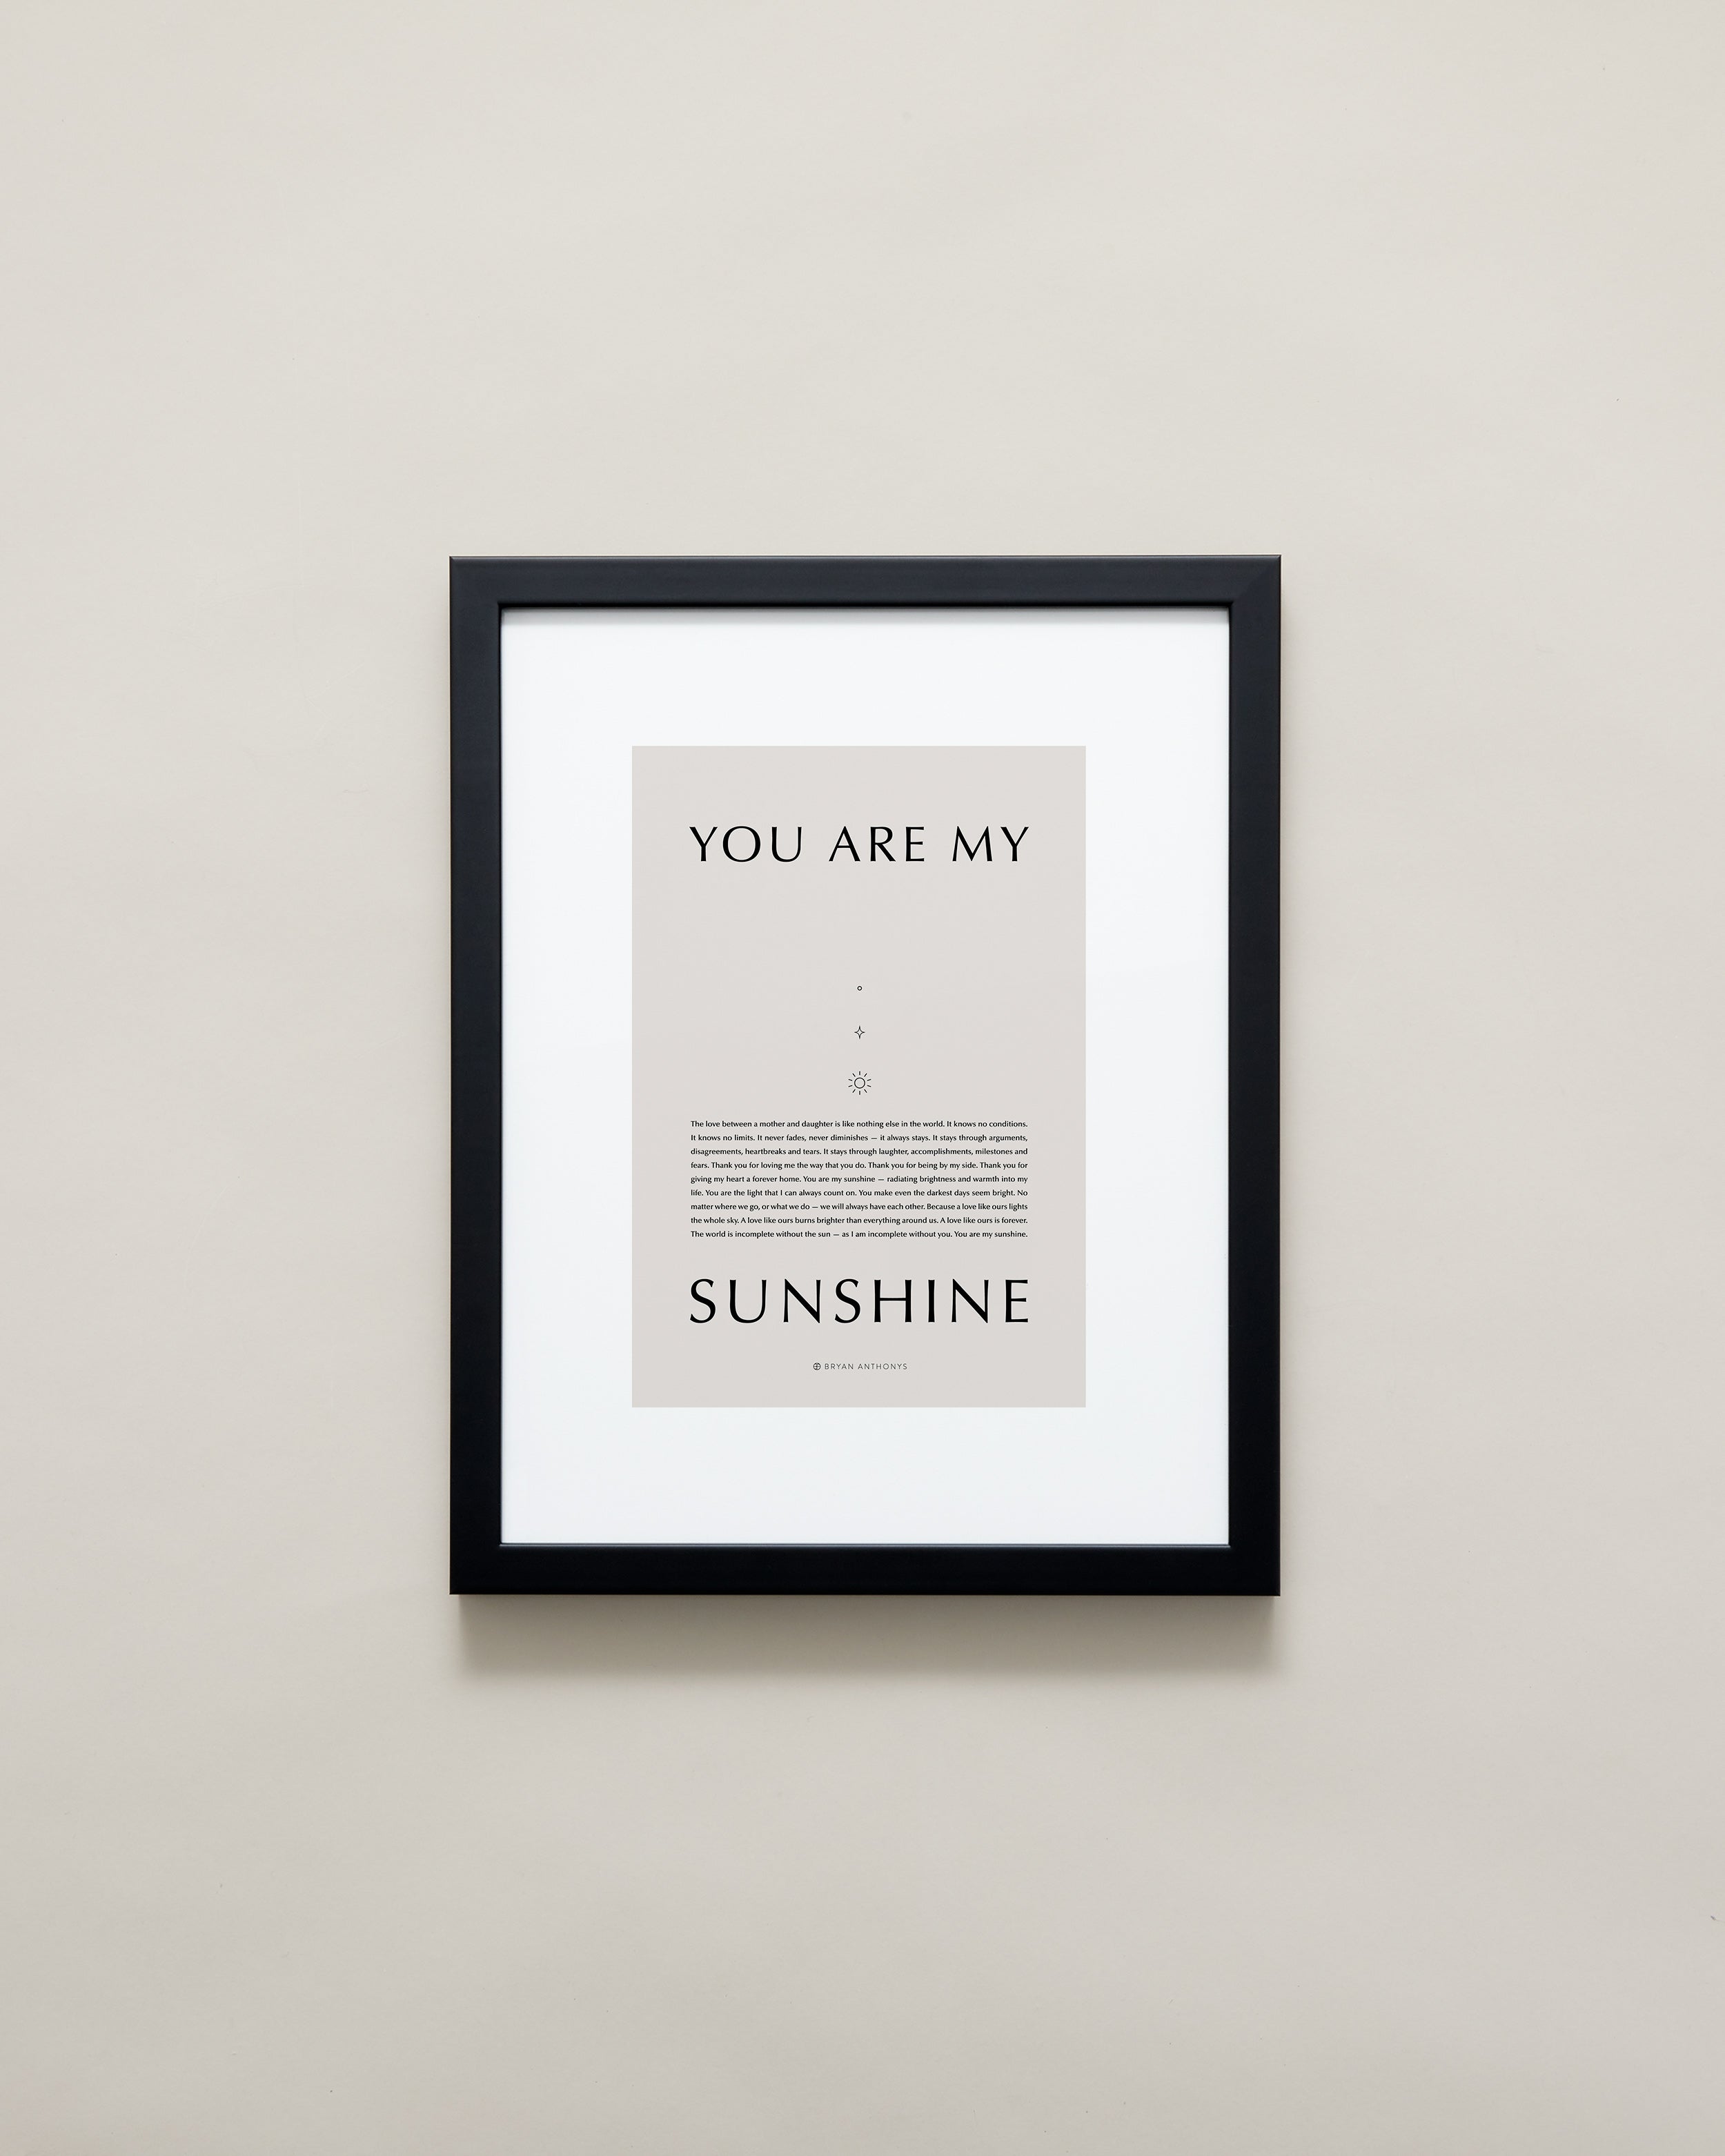 Bryan Anthonys Home Decor Purposeful Prints You Are My Sunshine Iconic Framed Print Tan Art With Black Frame 11x14